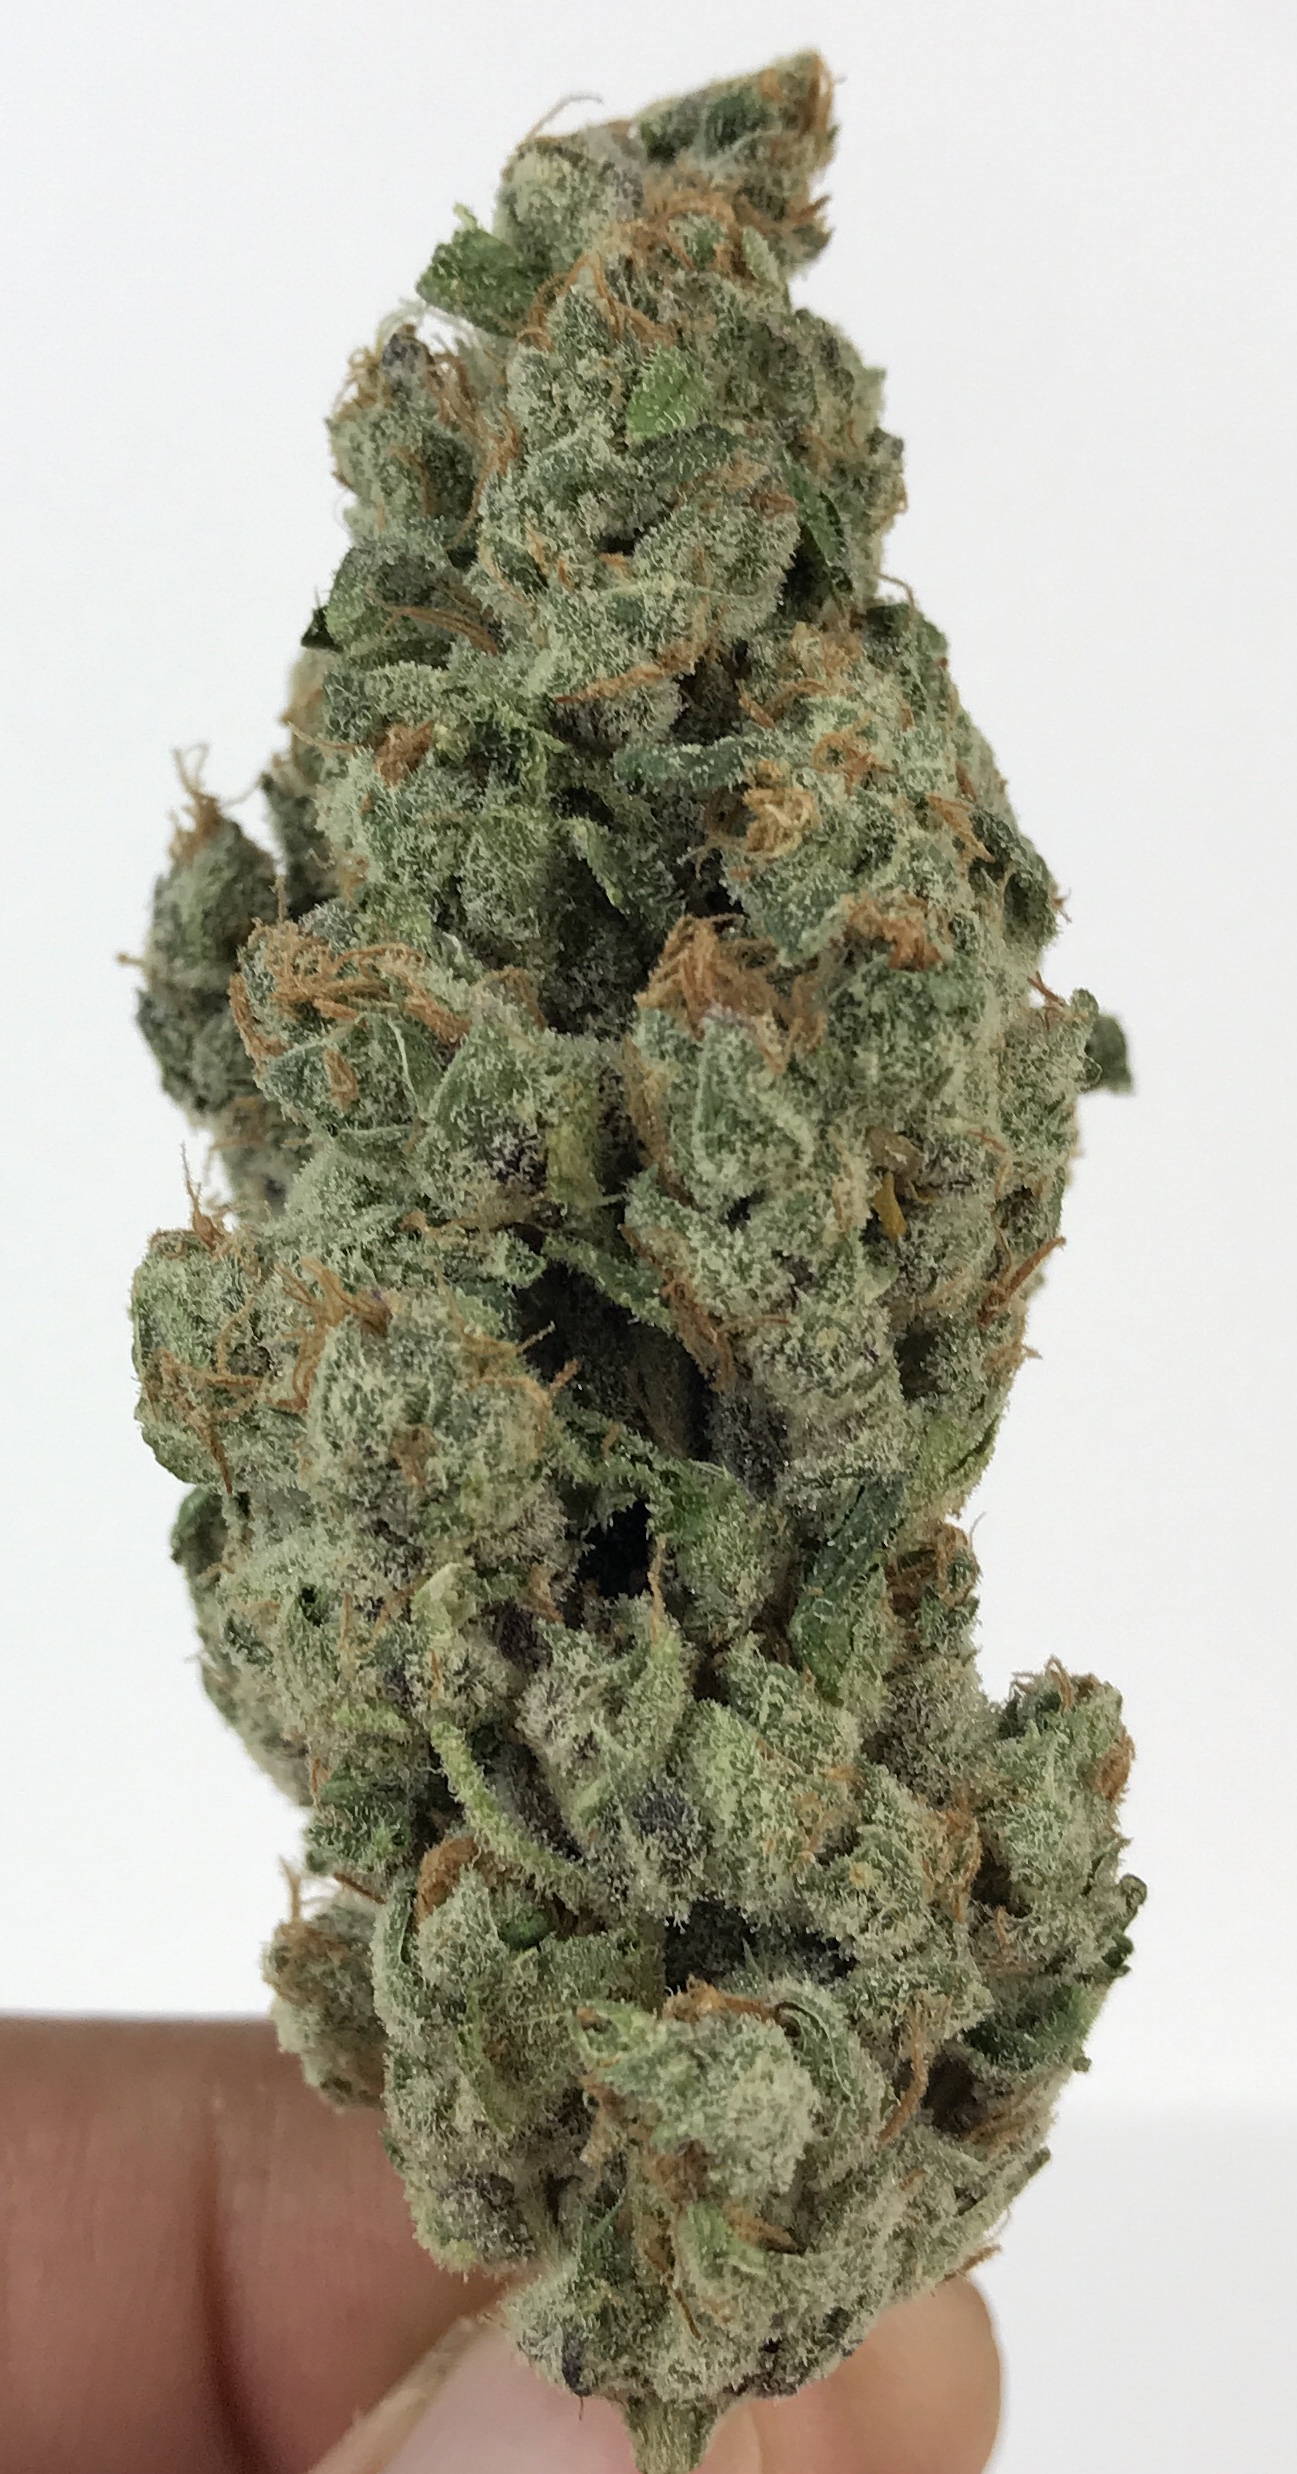 Cabbage Patch Strain Review - Bonza Blog